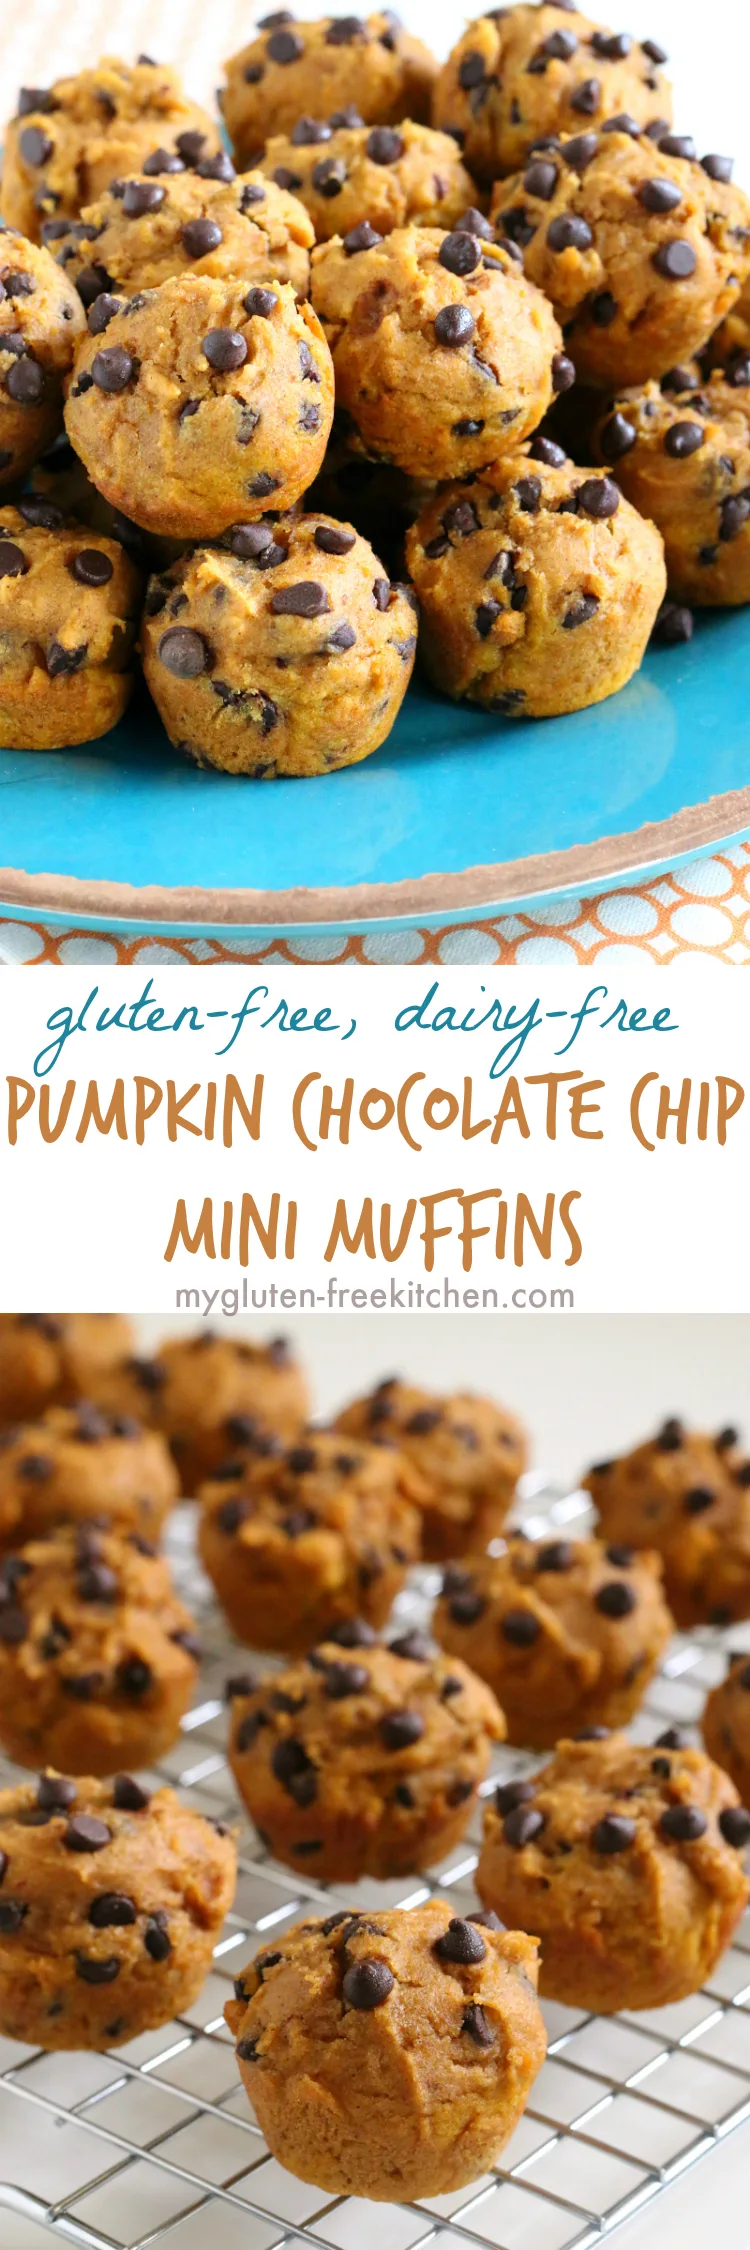 Gluten-free Dairy-free Pumpkin Muffins with Chocolate Chips. Easy, freezer friendly recipe that's nut-free too!